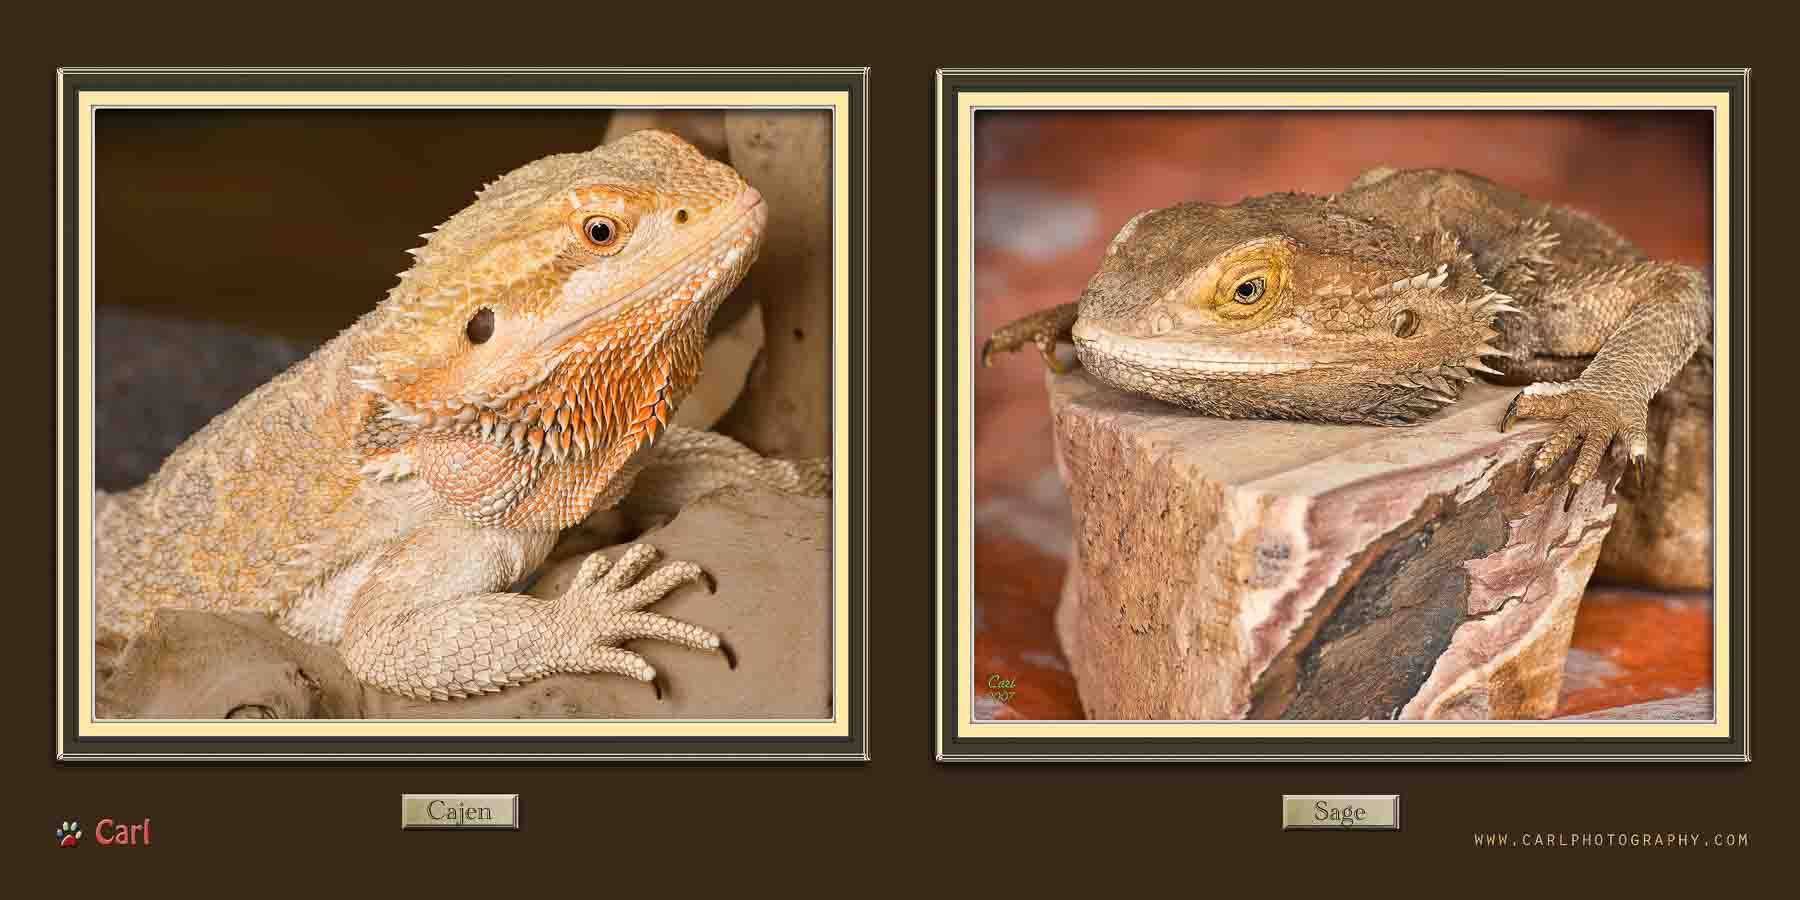 Two pictures of a lizard with different colors.